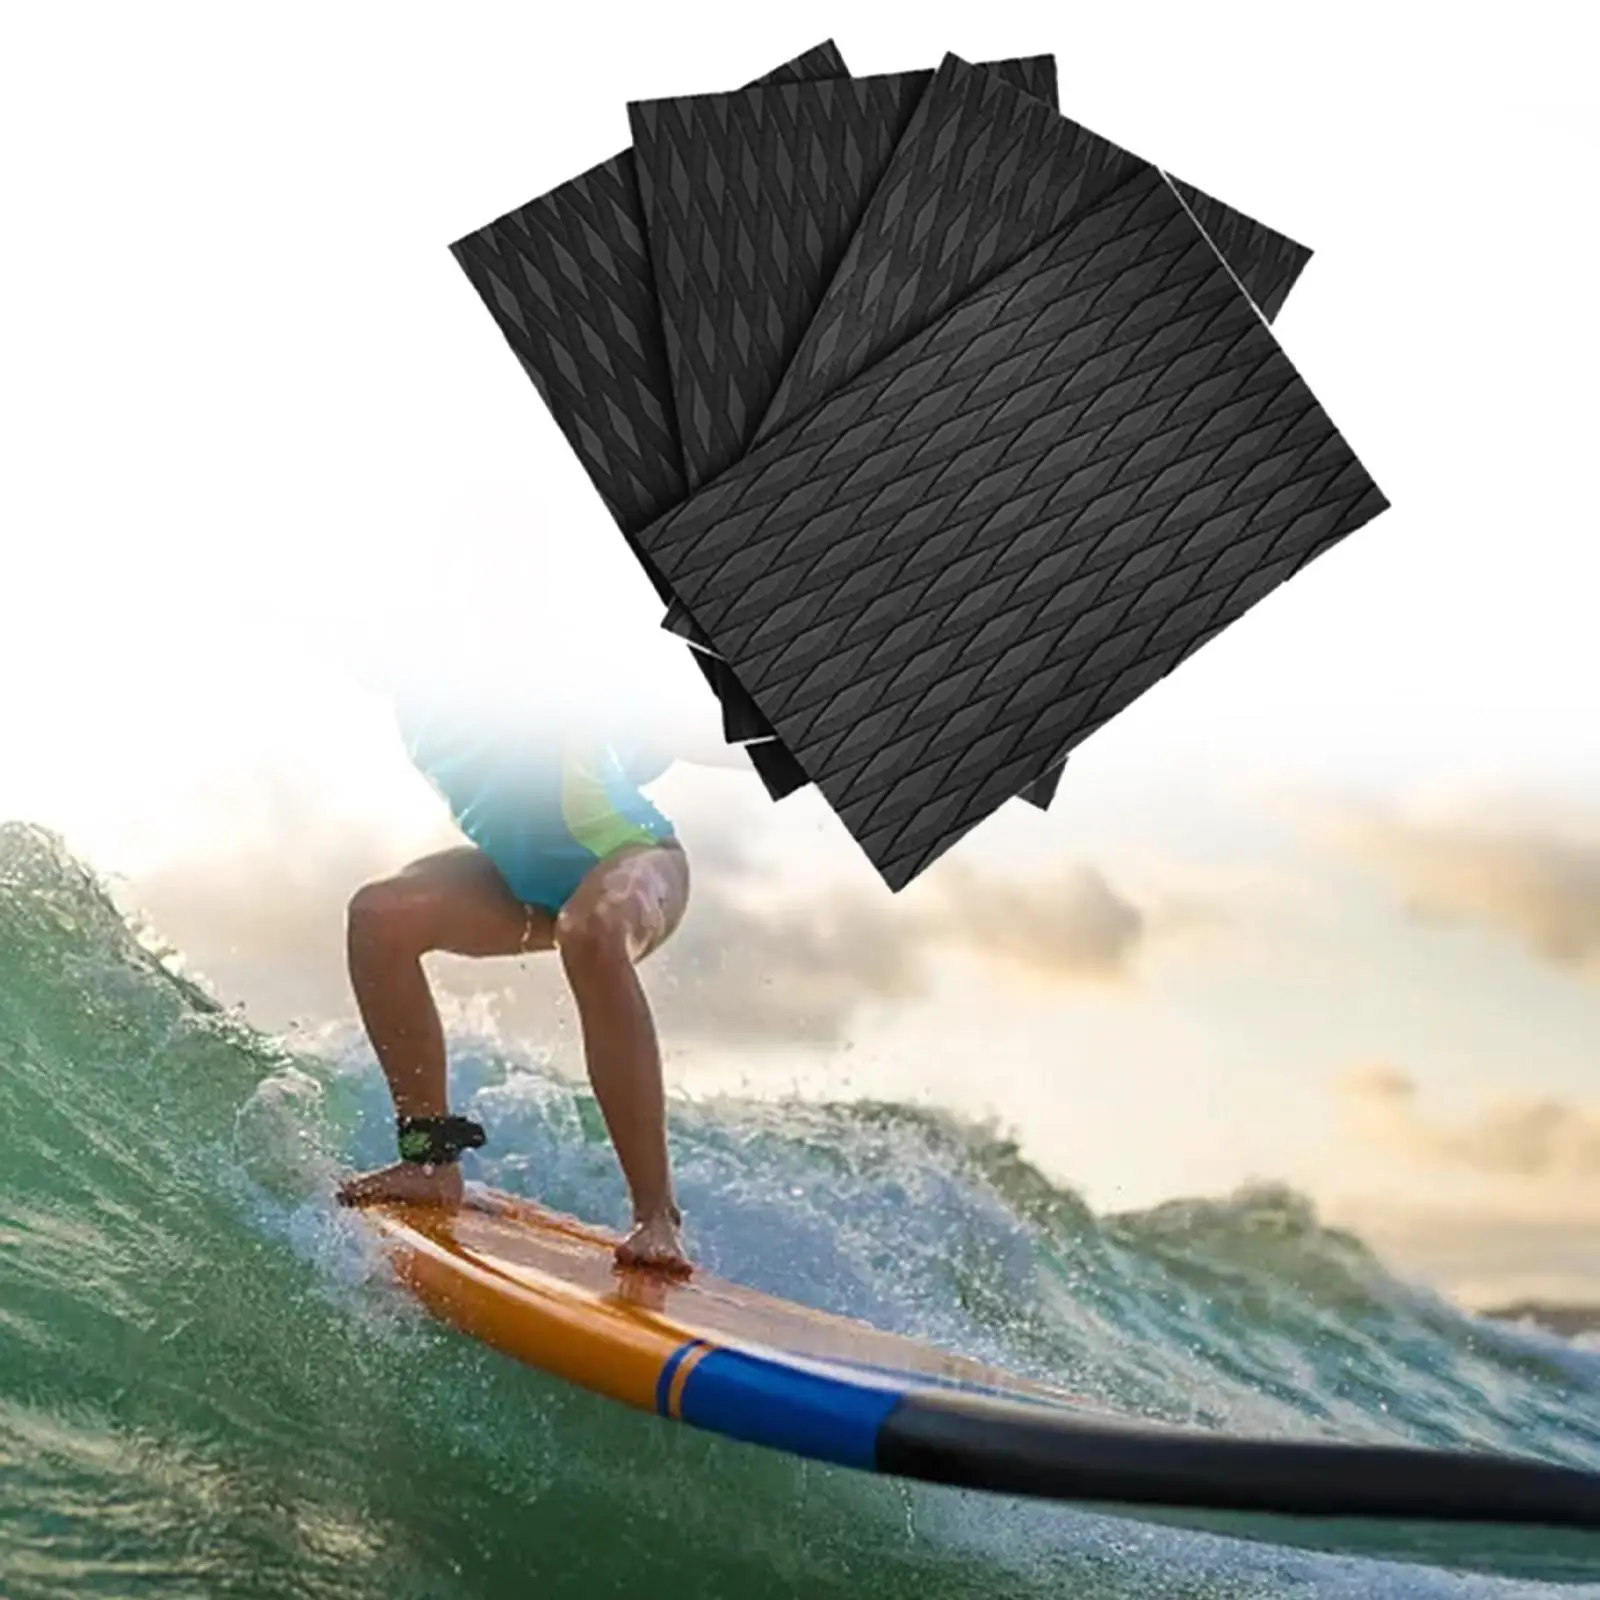 4Pcs Deck Grip Mats Anti Slip Traction Pad Universal Deck Pad for Stand up Paddleboard Kayak Yacht Longboard